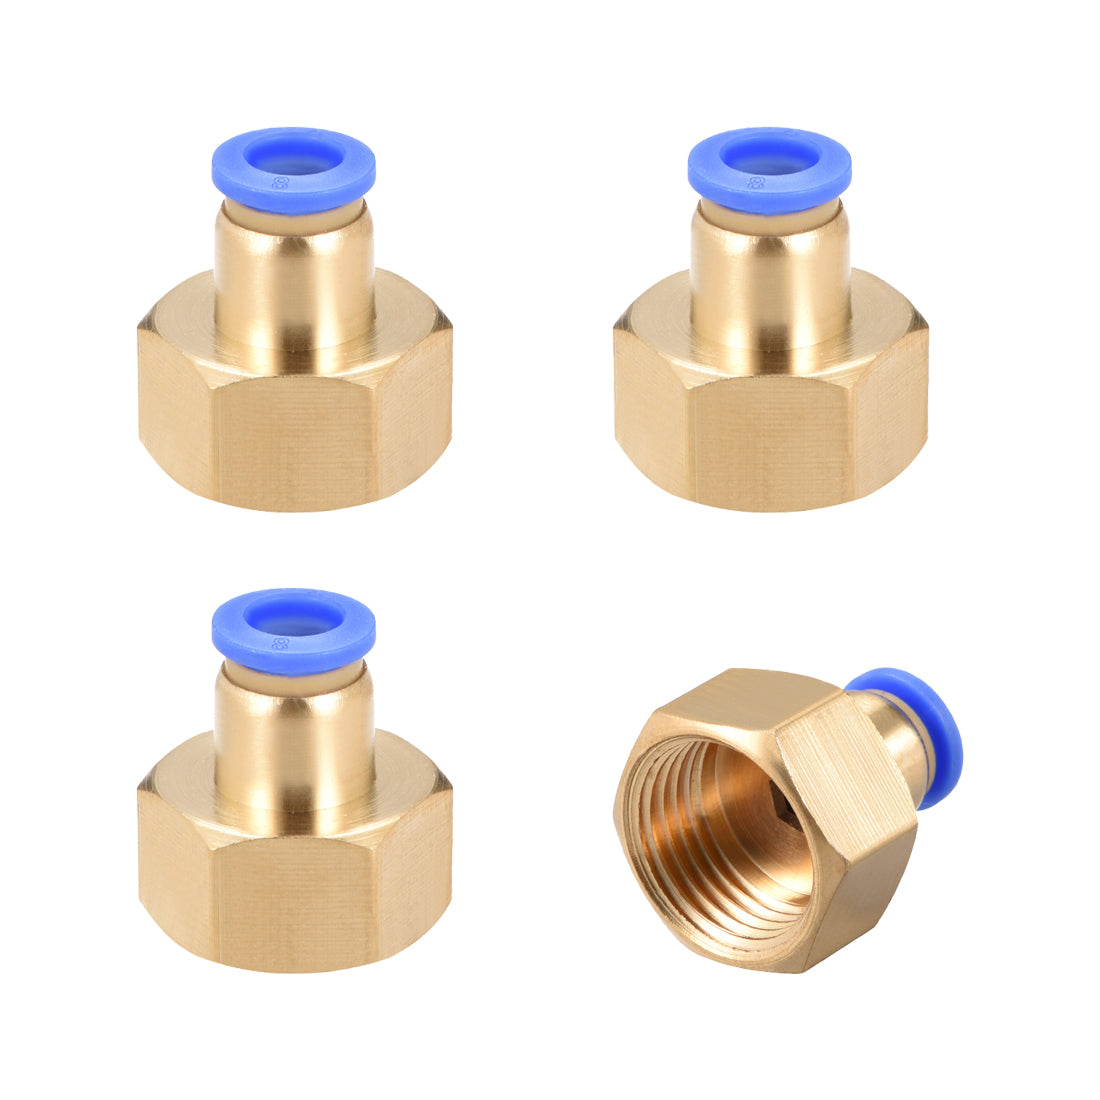 uxcell Uxcell Push to Connect Tube Fitting Adapter 8mm OD x G1/2" Female 4pcs